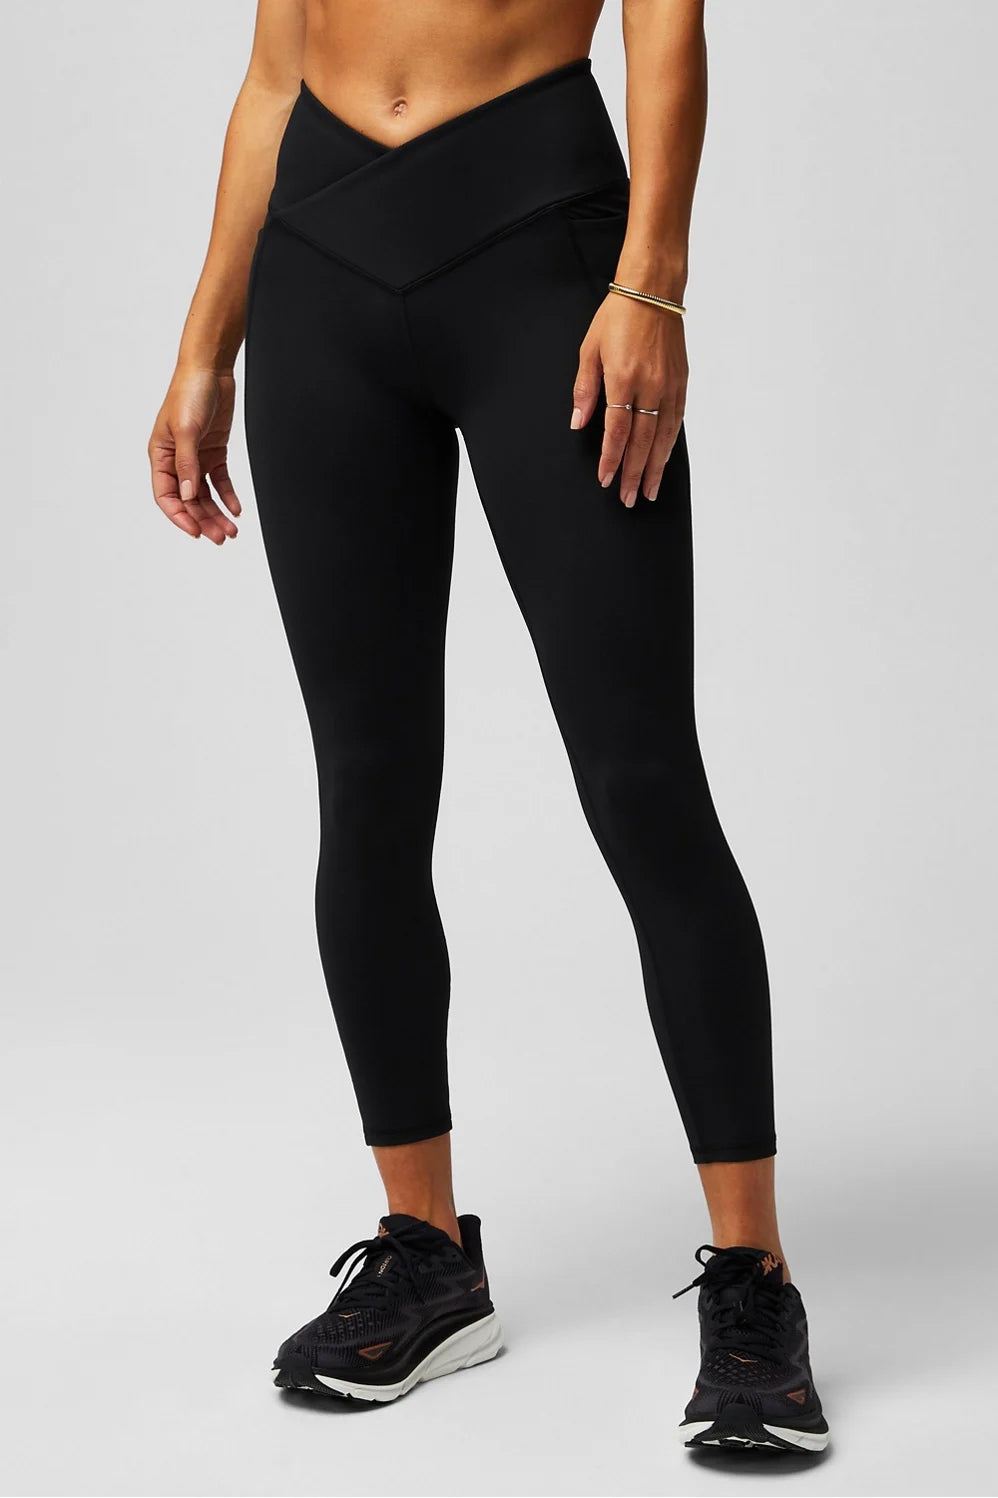 eXtend Low - Compression leggings for work and travel - Black